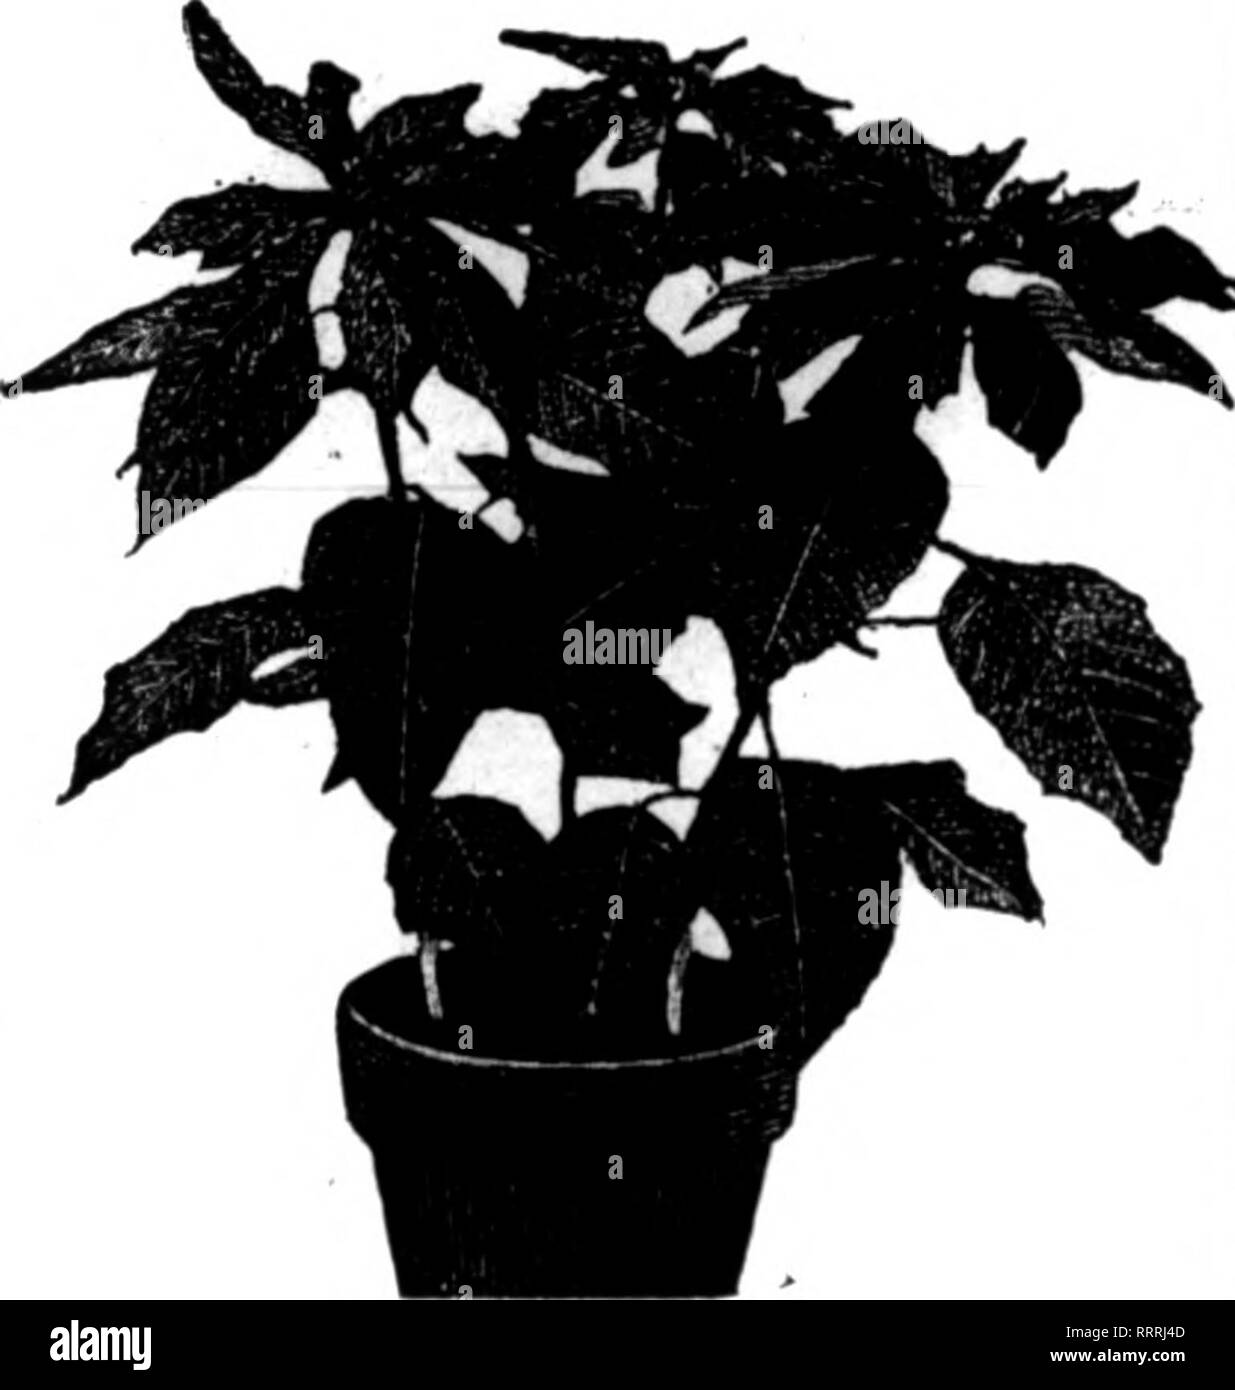 . Florists' review [microform]. Floriculture. Dracaena Godseffiana 2-irich pots $1.00 per doz. 3-inch pots 1.50 per doz. Dracaena Massangeana 6-inch $1.00 each Begonia Glory of Cincinnati No better stock can be found anywhere, these are our special pride and we kno n they will please. Now in fine bloom and just right for Christmas. 6-inch $0.60 to $0.75 each 6-inch 1.00 to 1.2o each 7-inch 1.50 to 2.00 each Begonia Gloire de Lorraine 6-inch, in full bloom 76c to $1.60 each 7-inch, in full bloom 2.00 each. Poinsettias Choice stock in pans with good bracts (according to value), from 76c to $2.60 Stock Photo